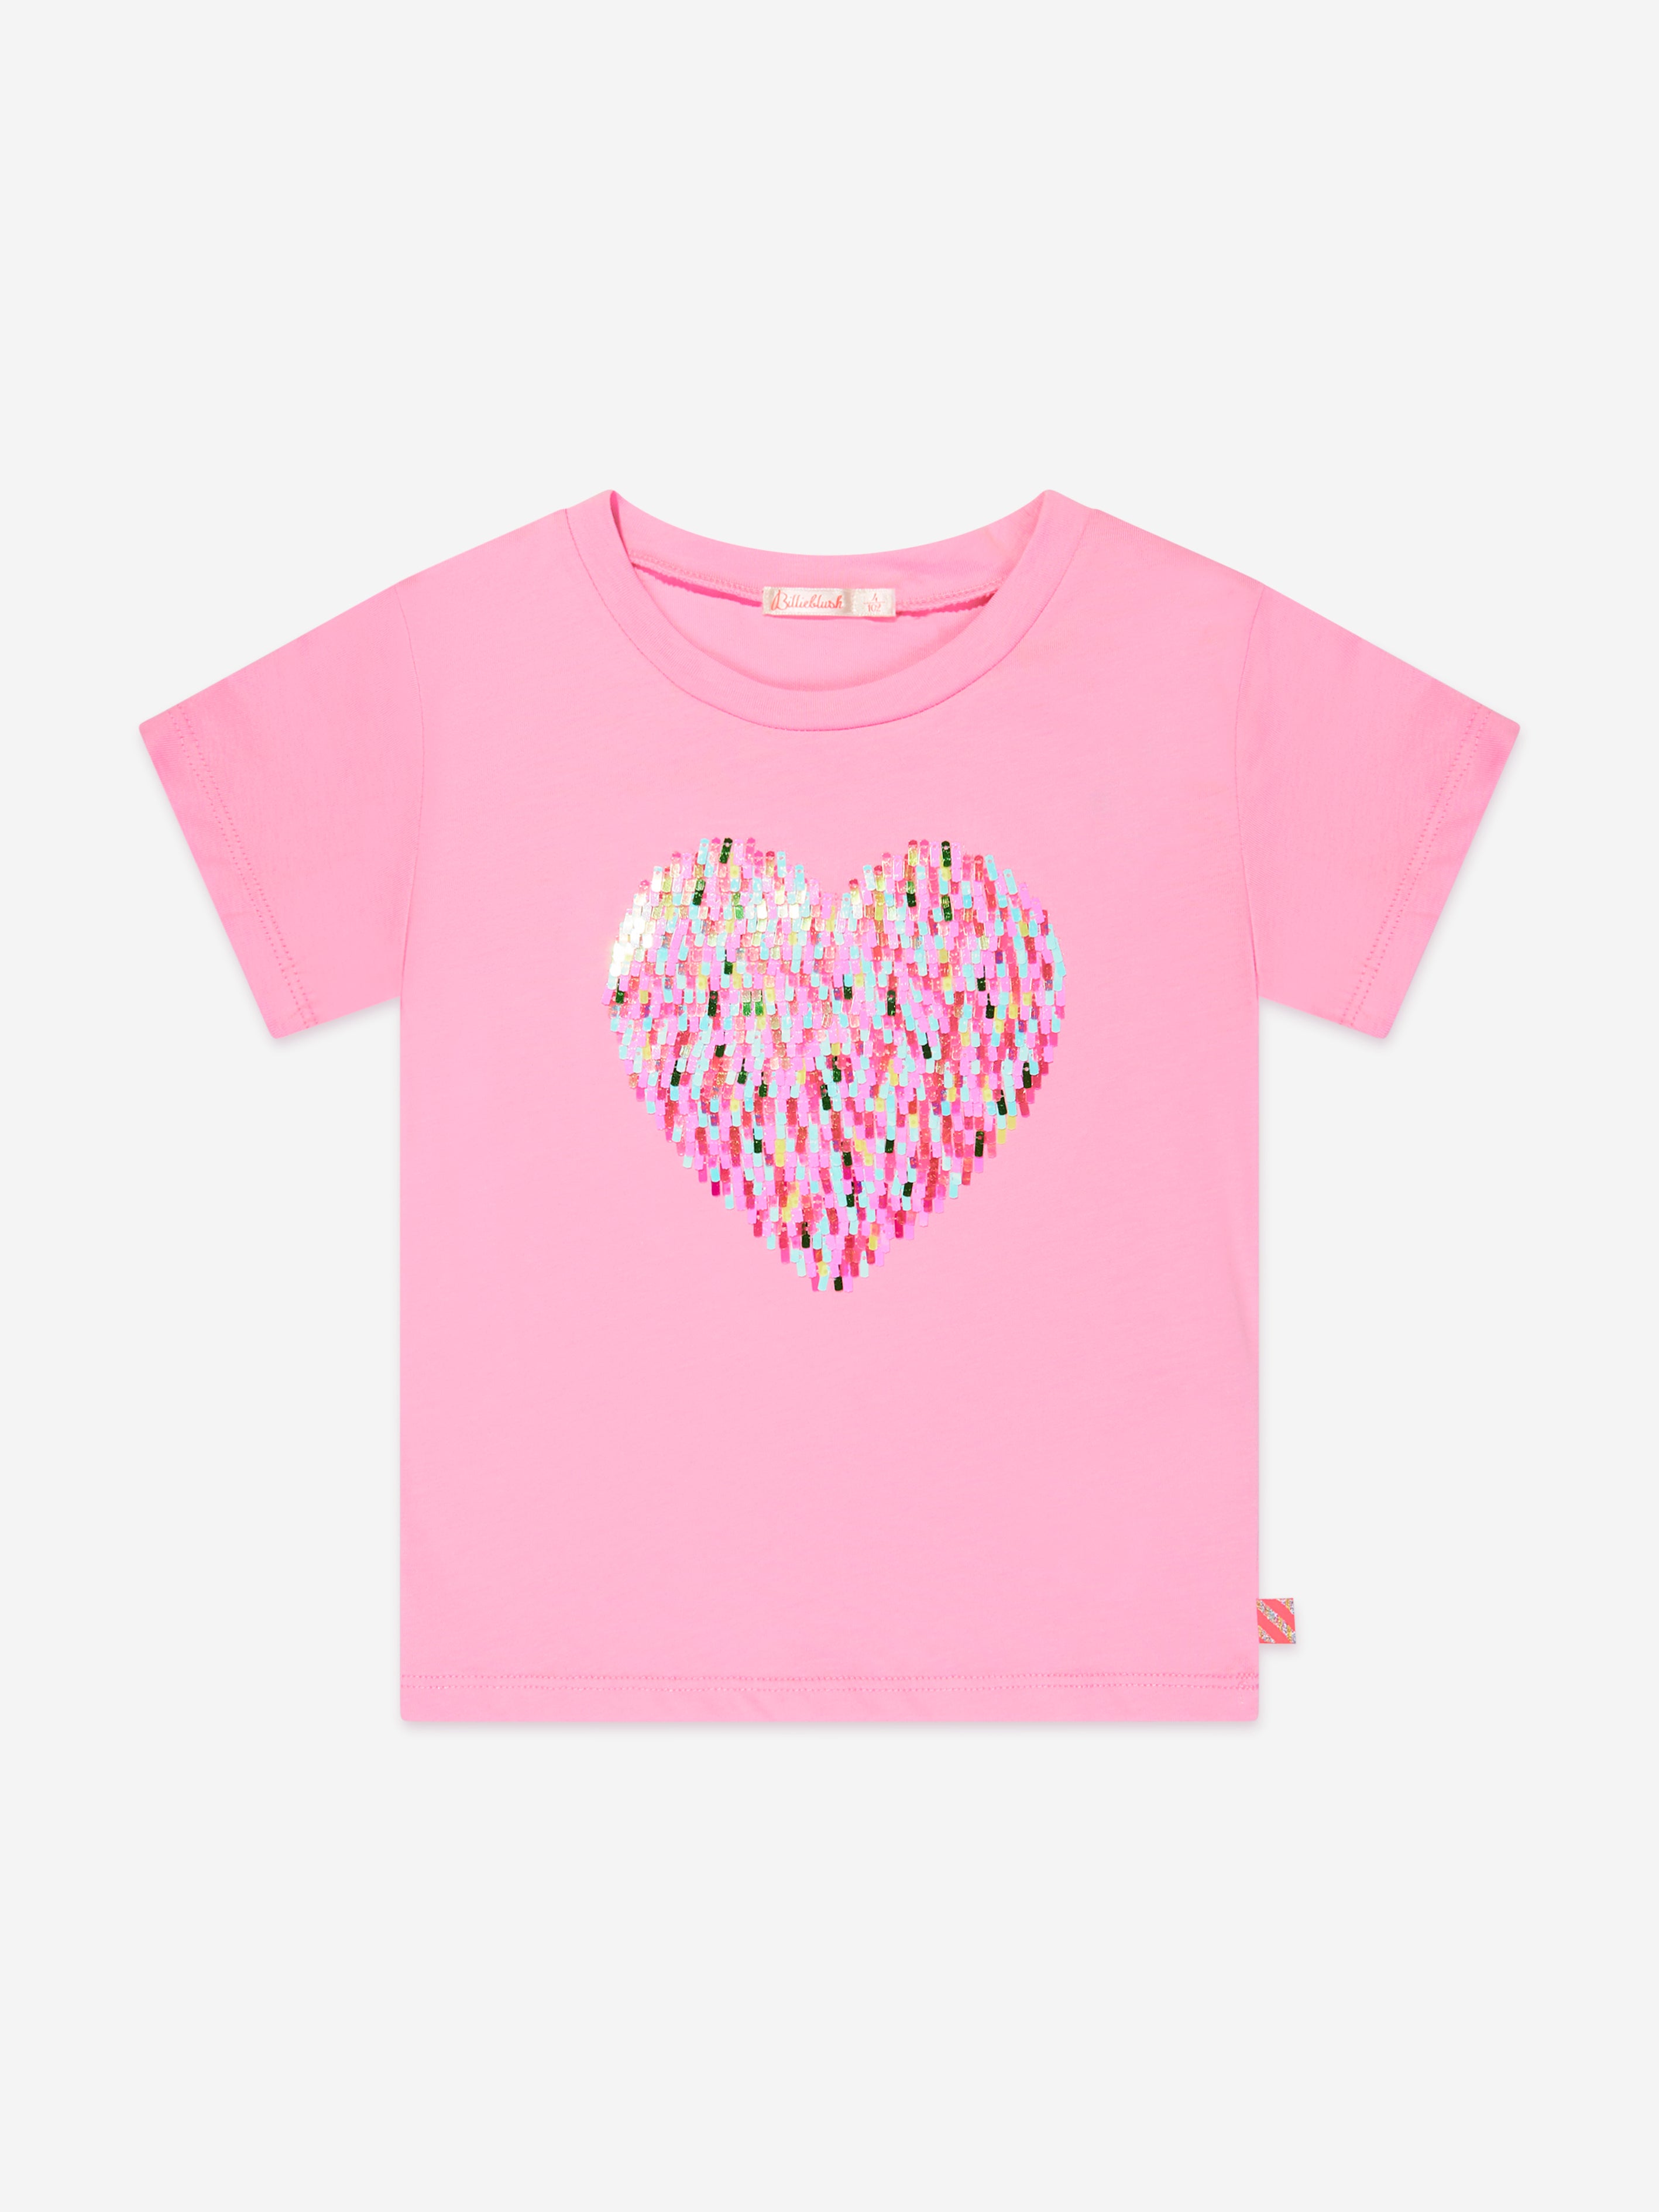 Girls Pink Glitter Forever Blowing Bubbles T-Shirt